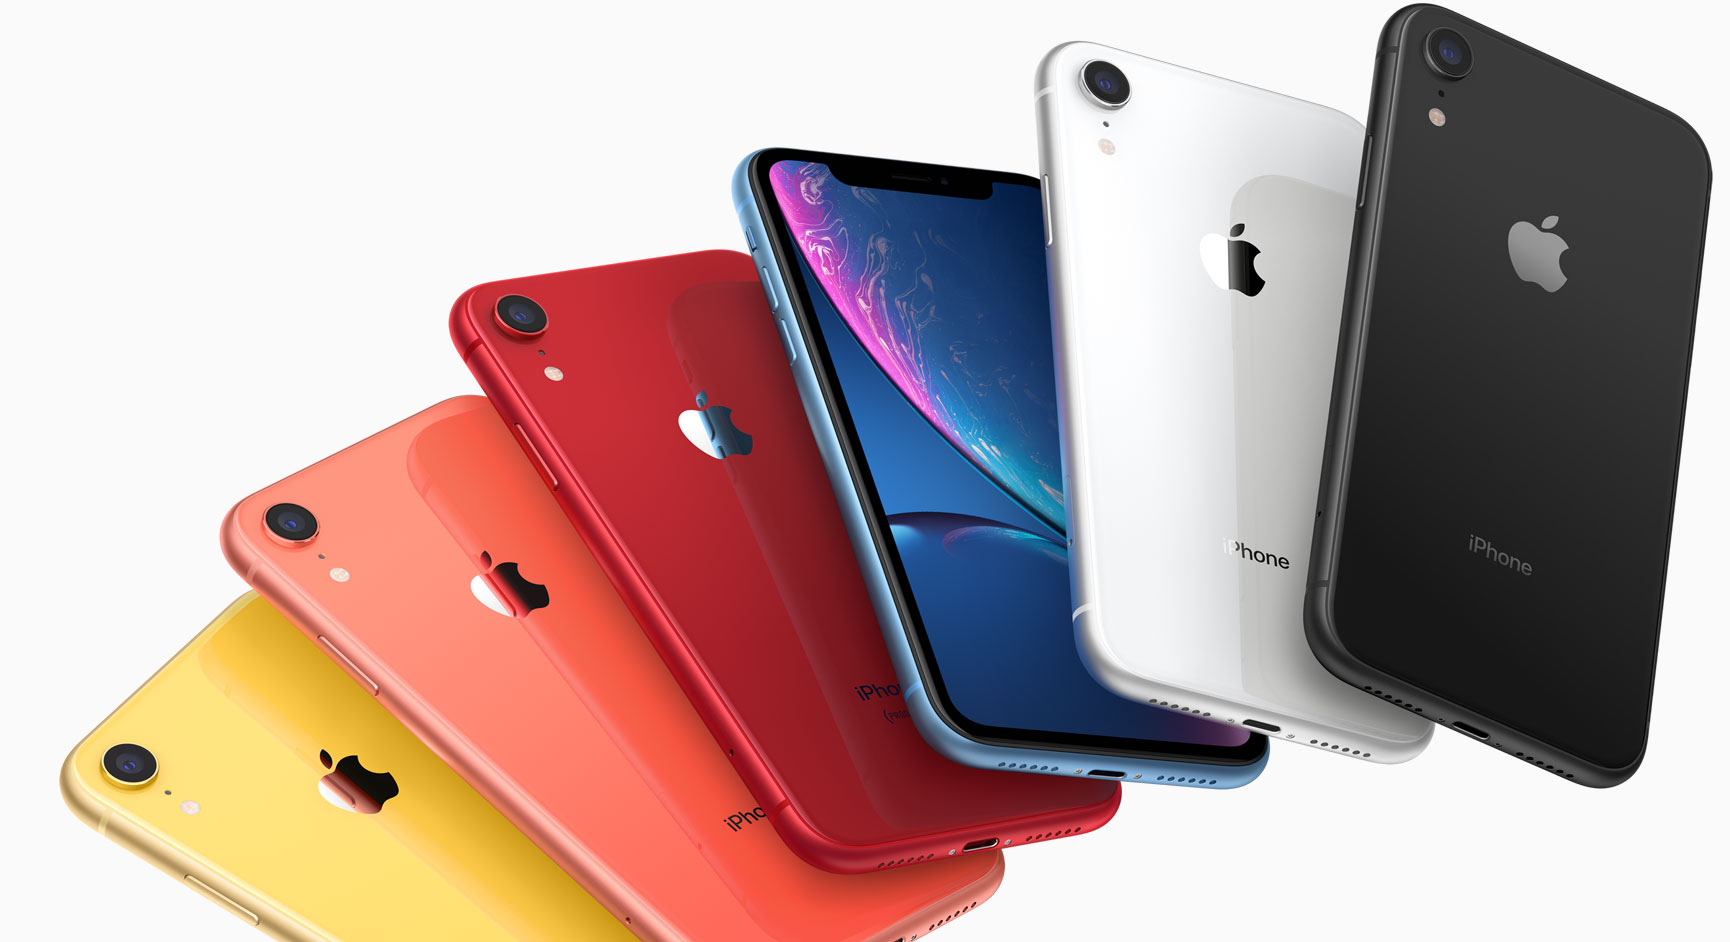 Offer: 256GB iPhone XR with discount of $ 1,400!